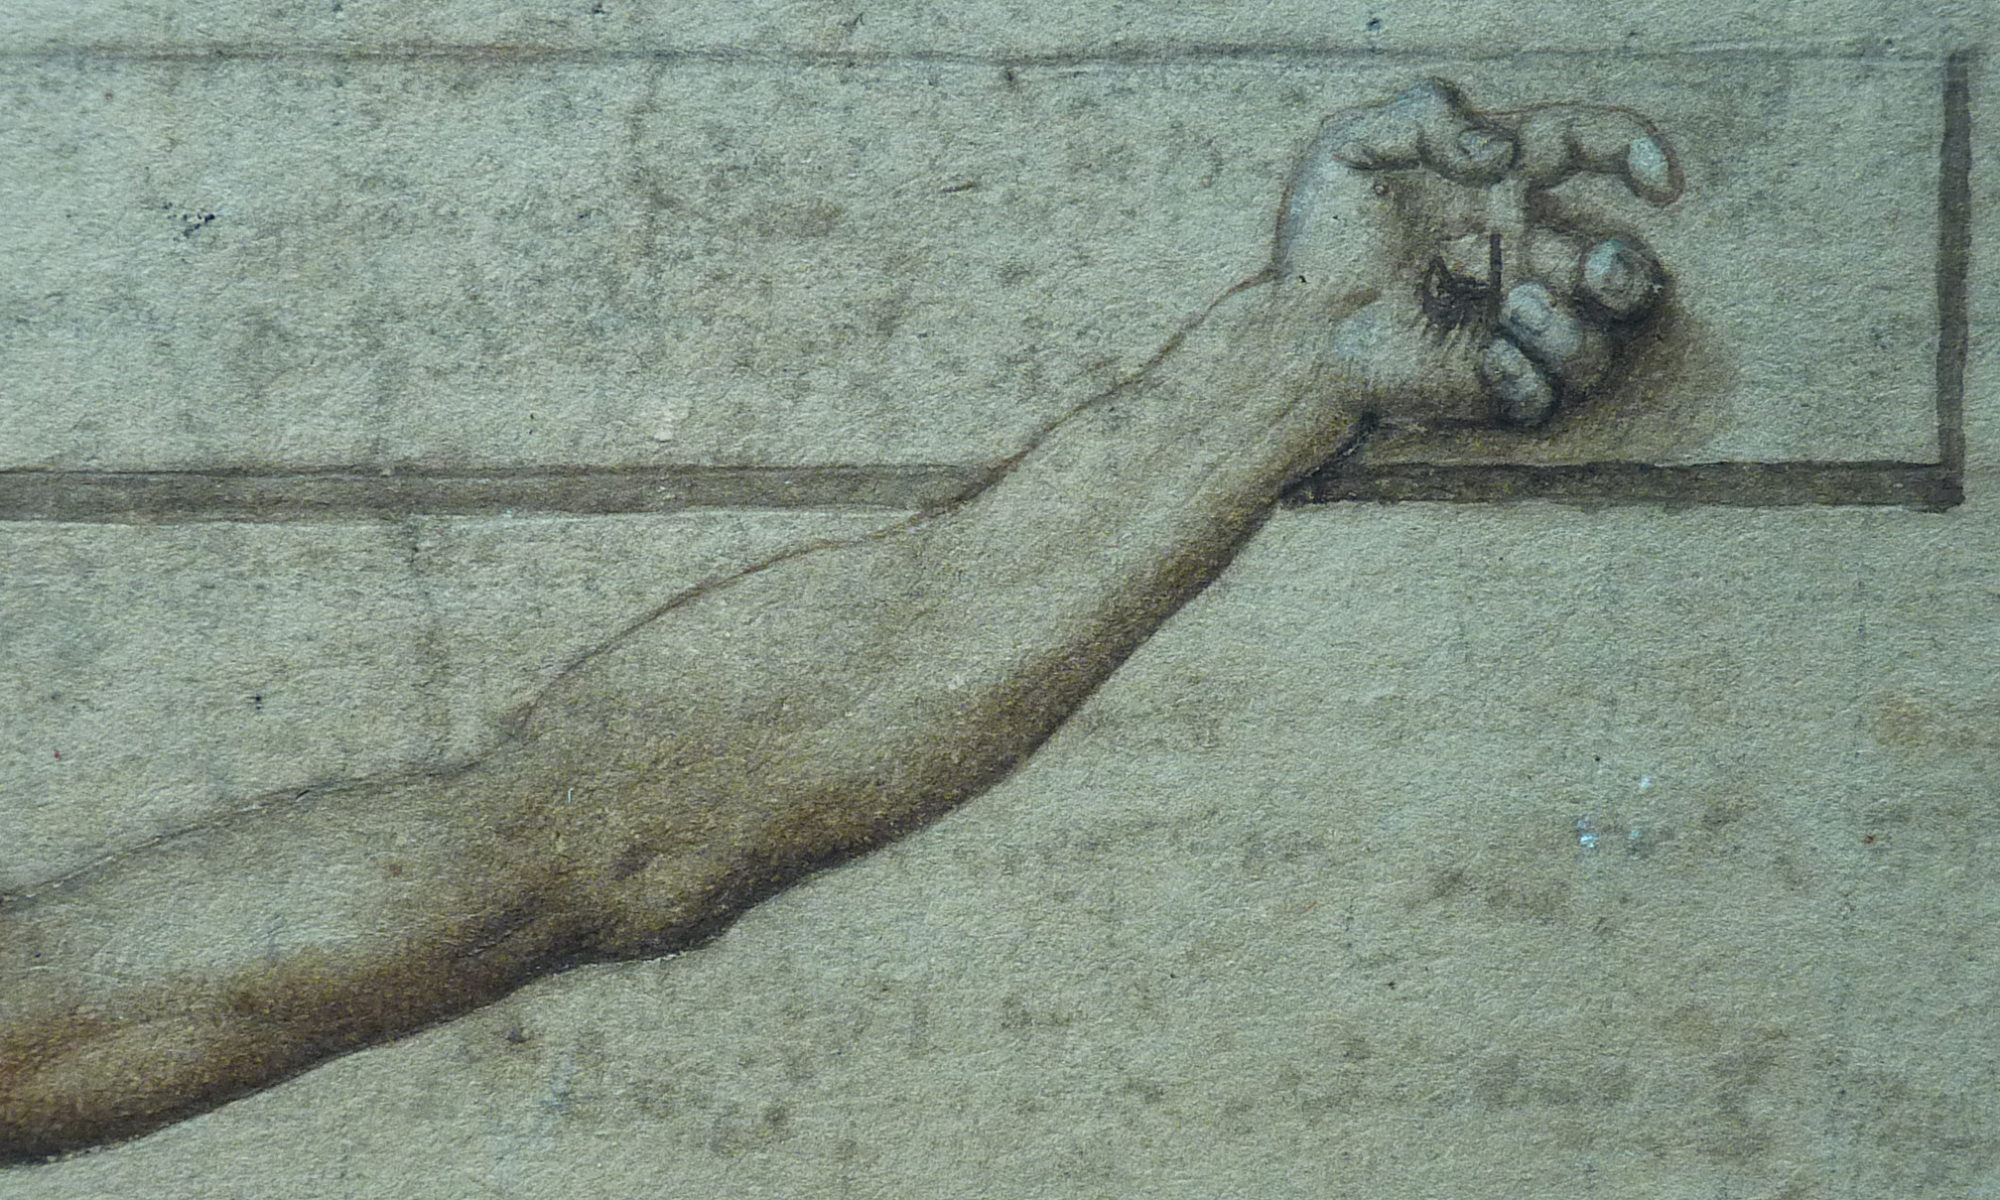 Jesus nailed hand on cross on marble stone